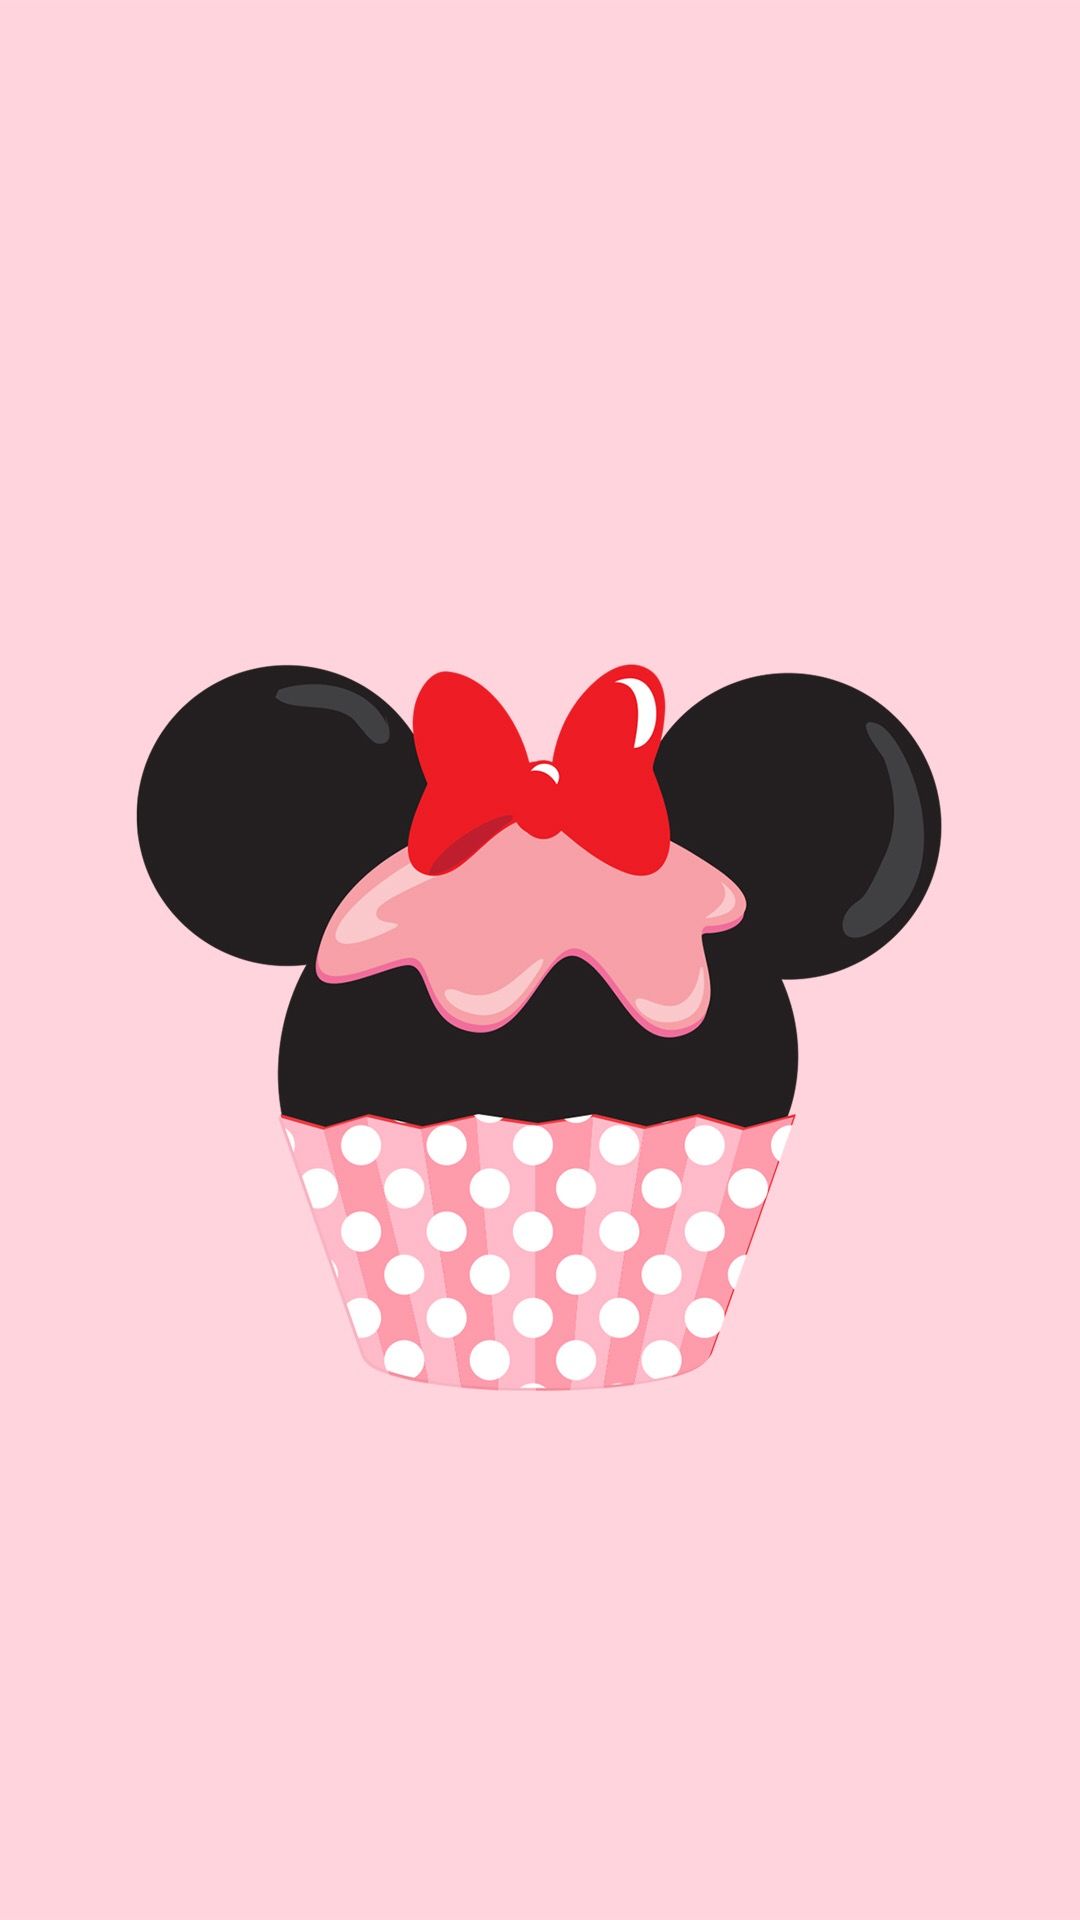 minnie mouse wallpaper for android,pink,red,pattern,polka dot,design